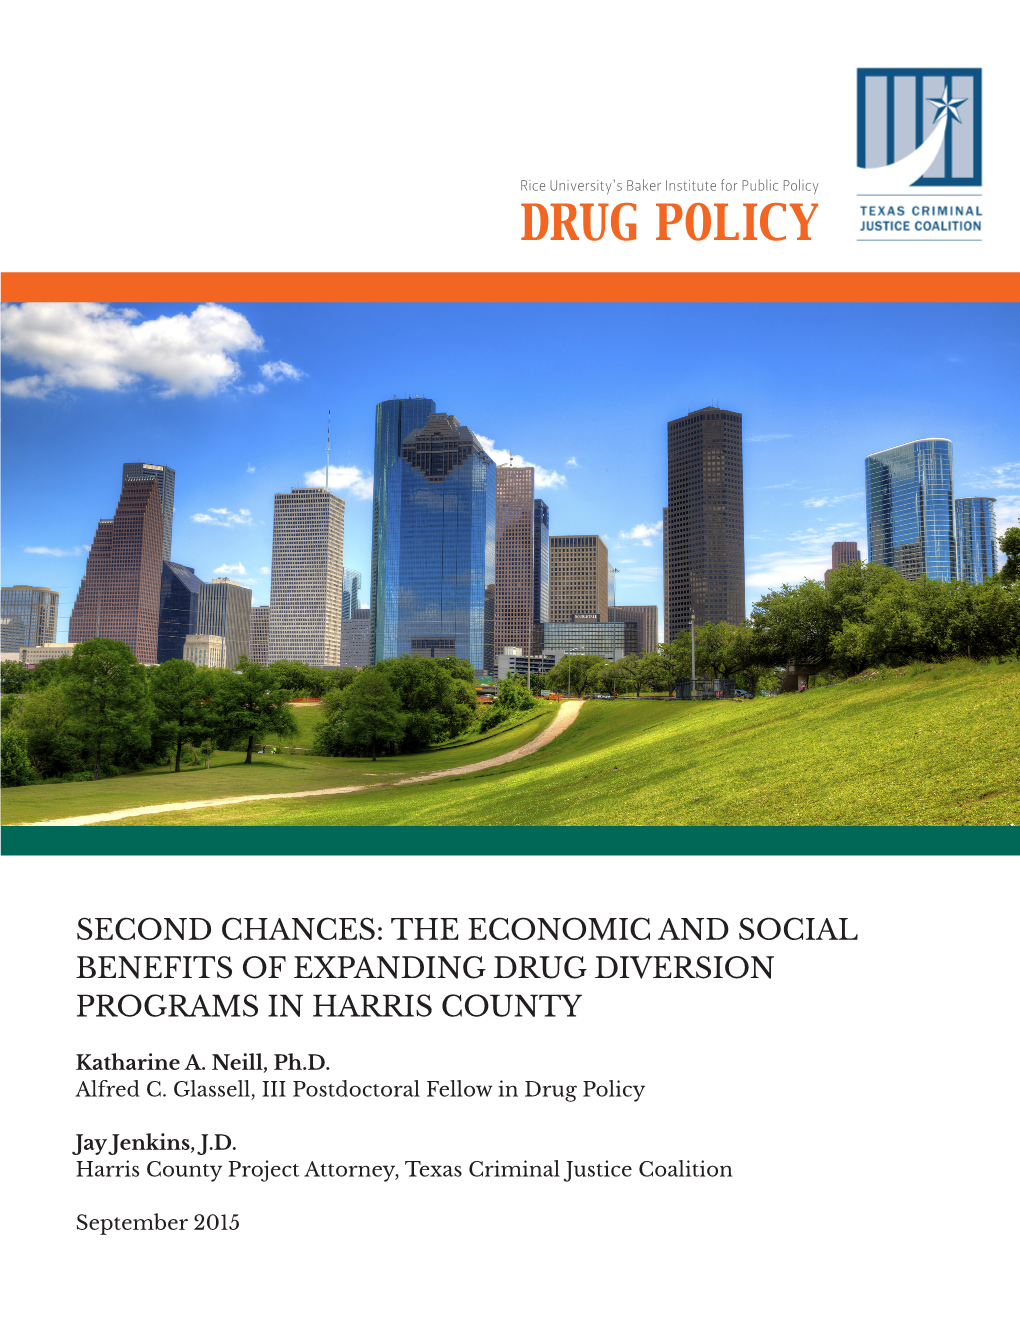 Second Chances: the Economic and Social Benefits of Expanding Drug Diversion Programs in Harris County